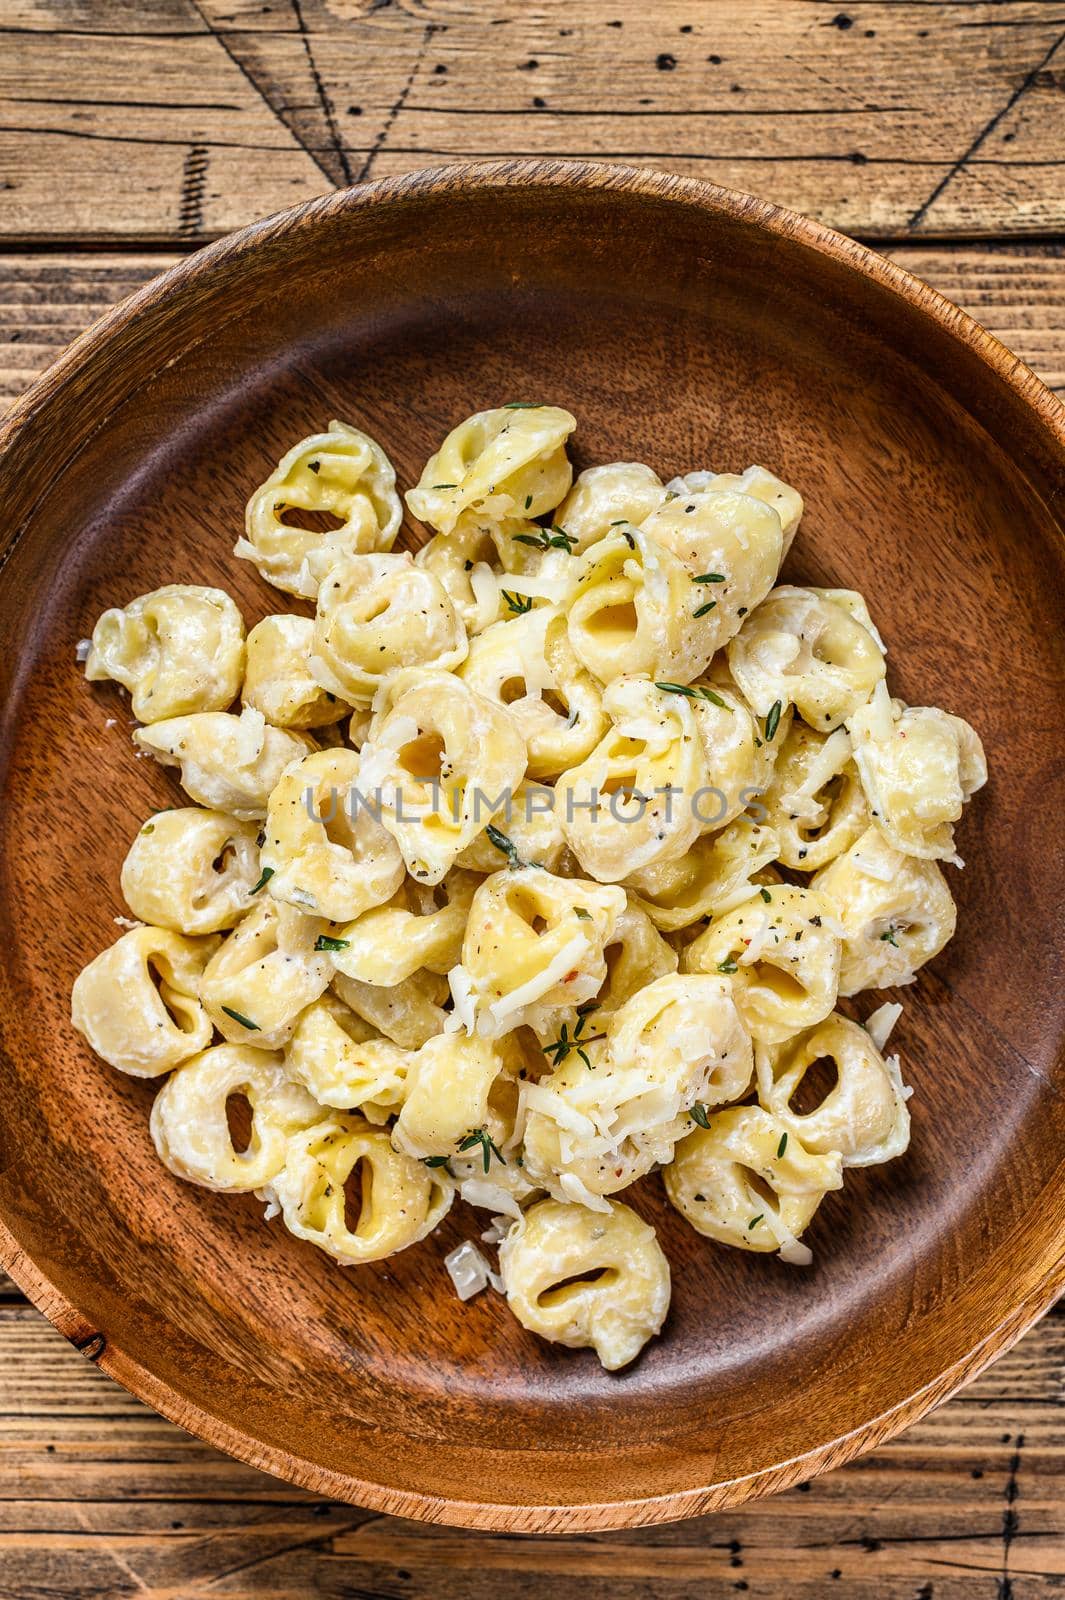 Ravioli or tortellini pasta in cream cheese sauce with meat. wooden background. Top view.